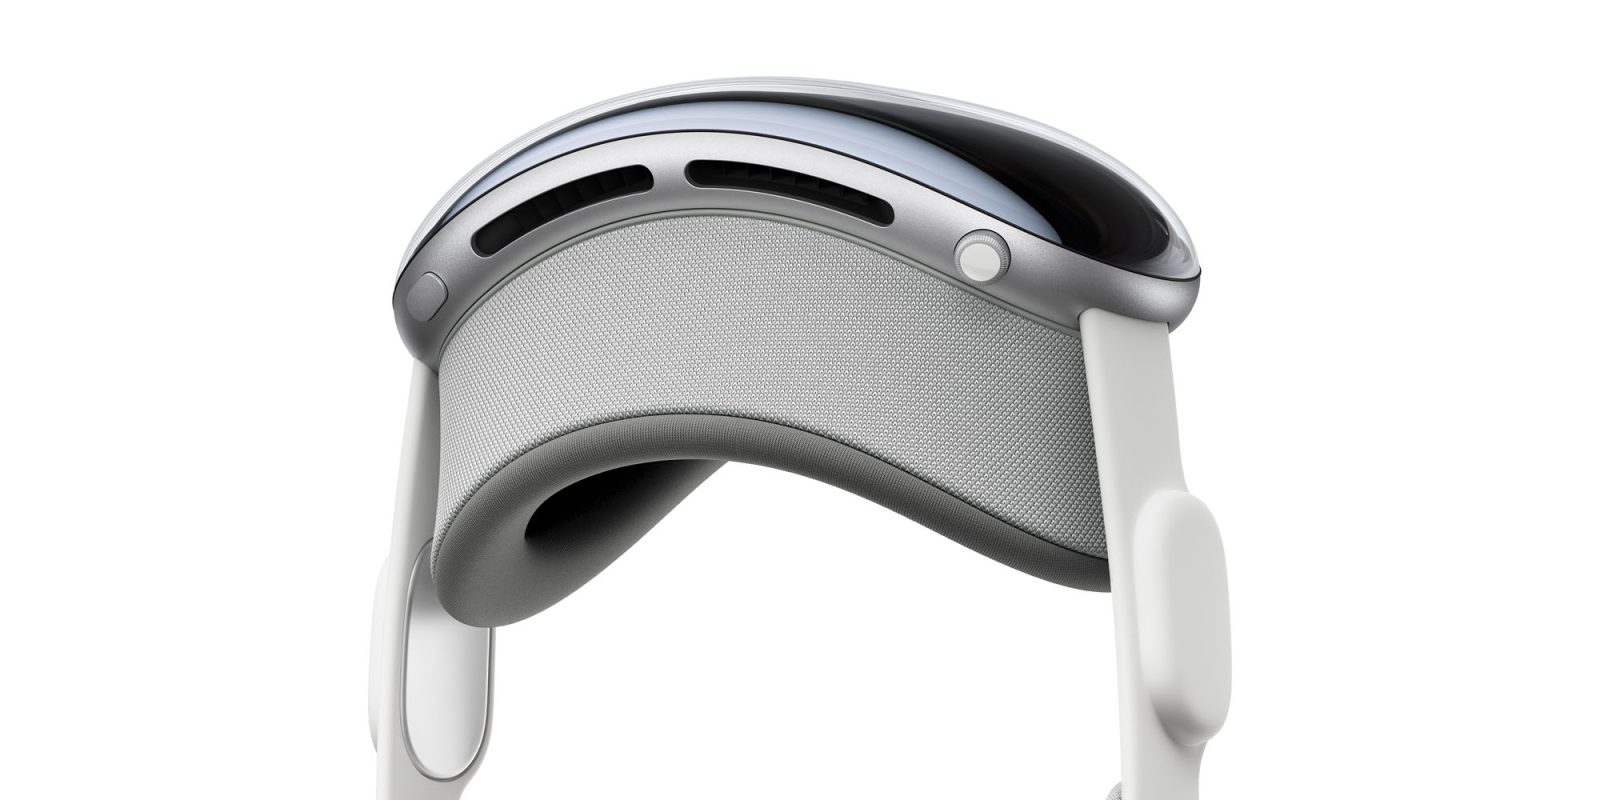 Vision Pro scalpers | Apple promo image of headset